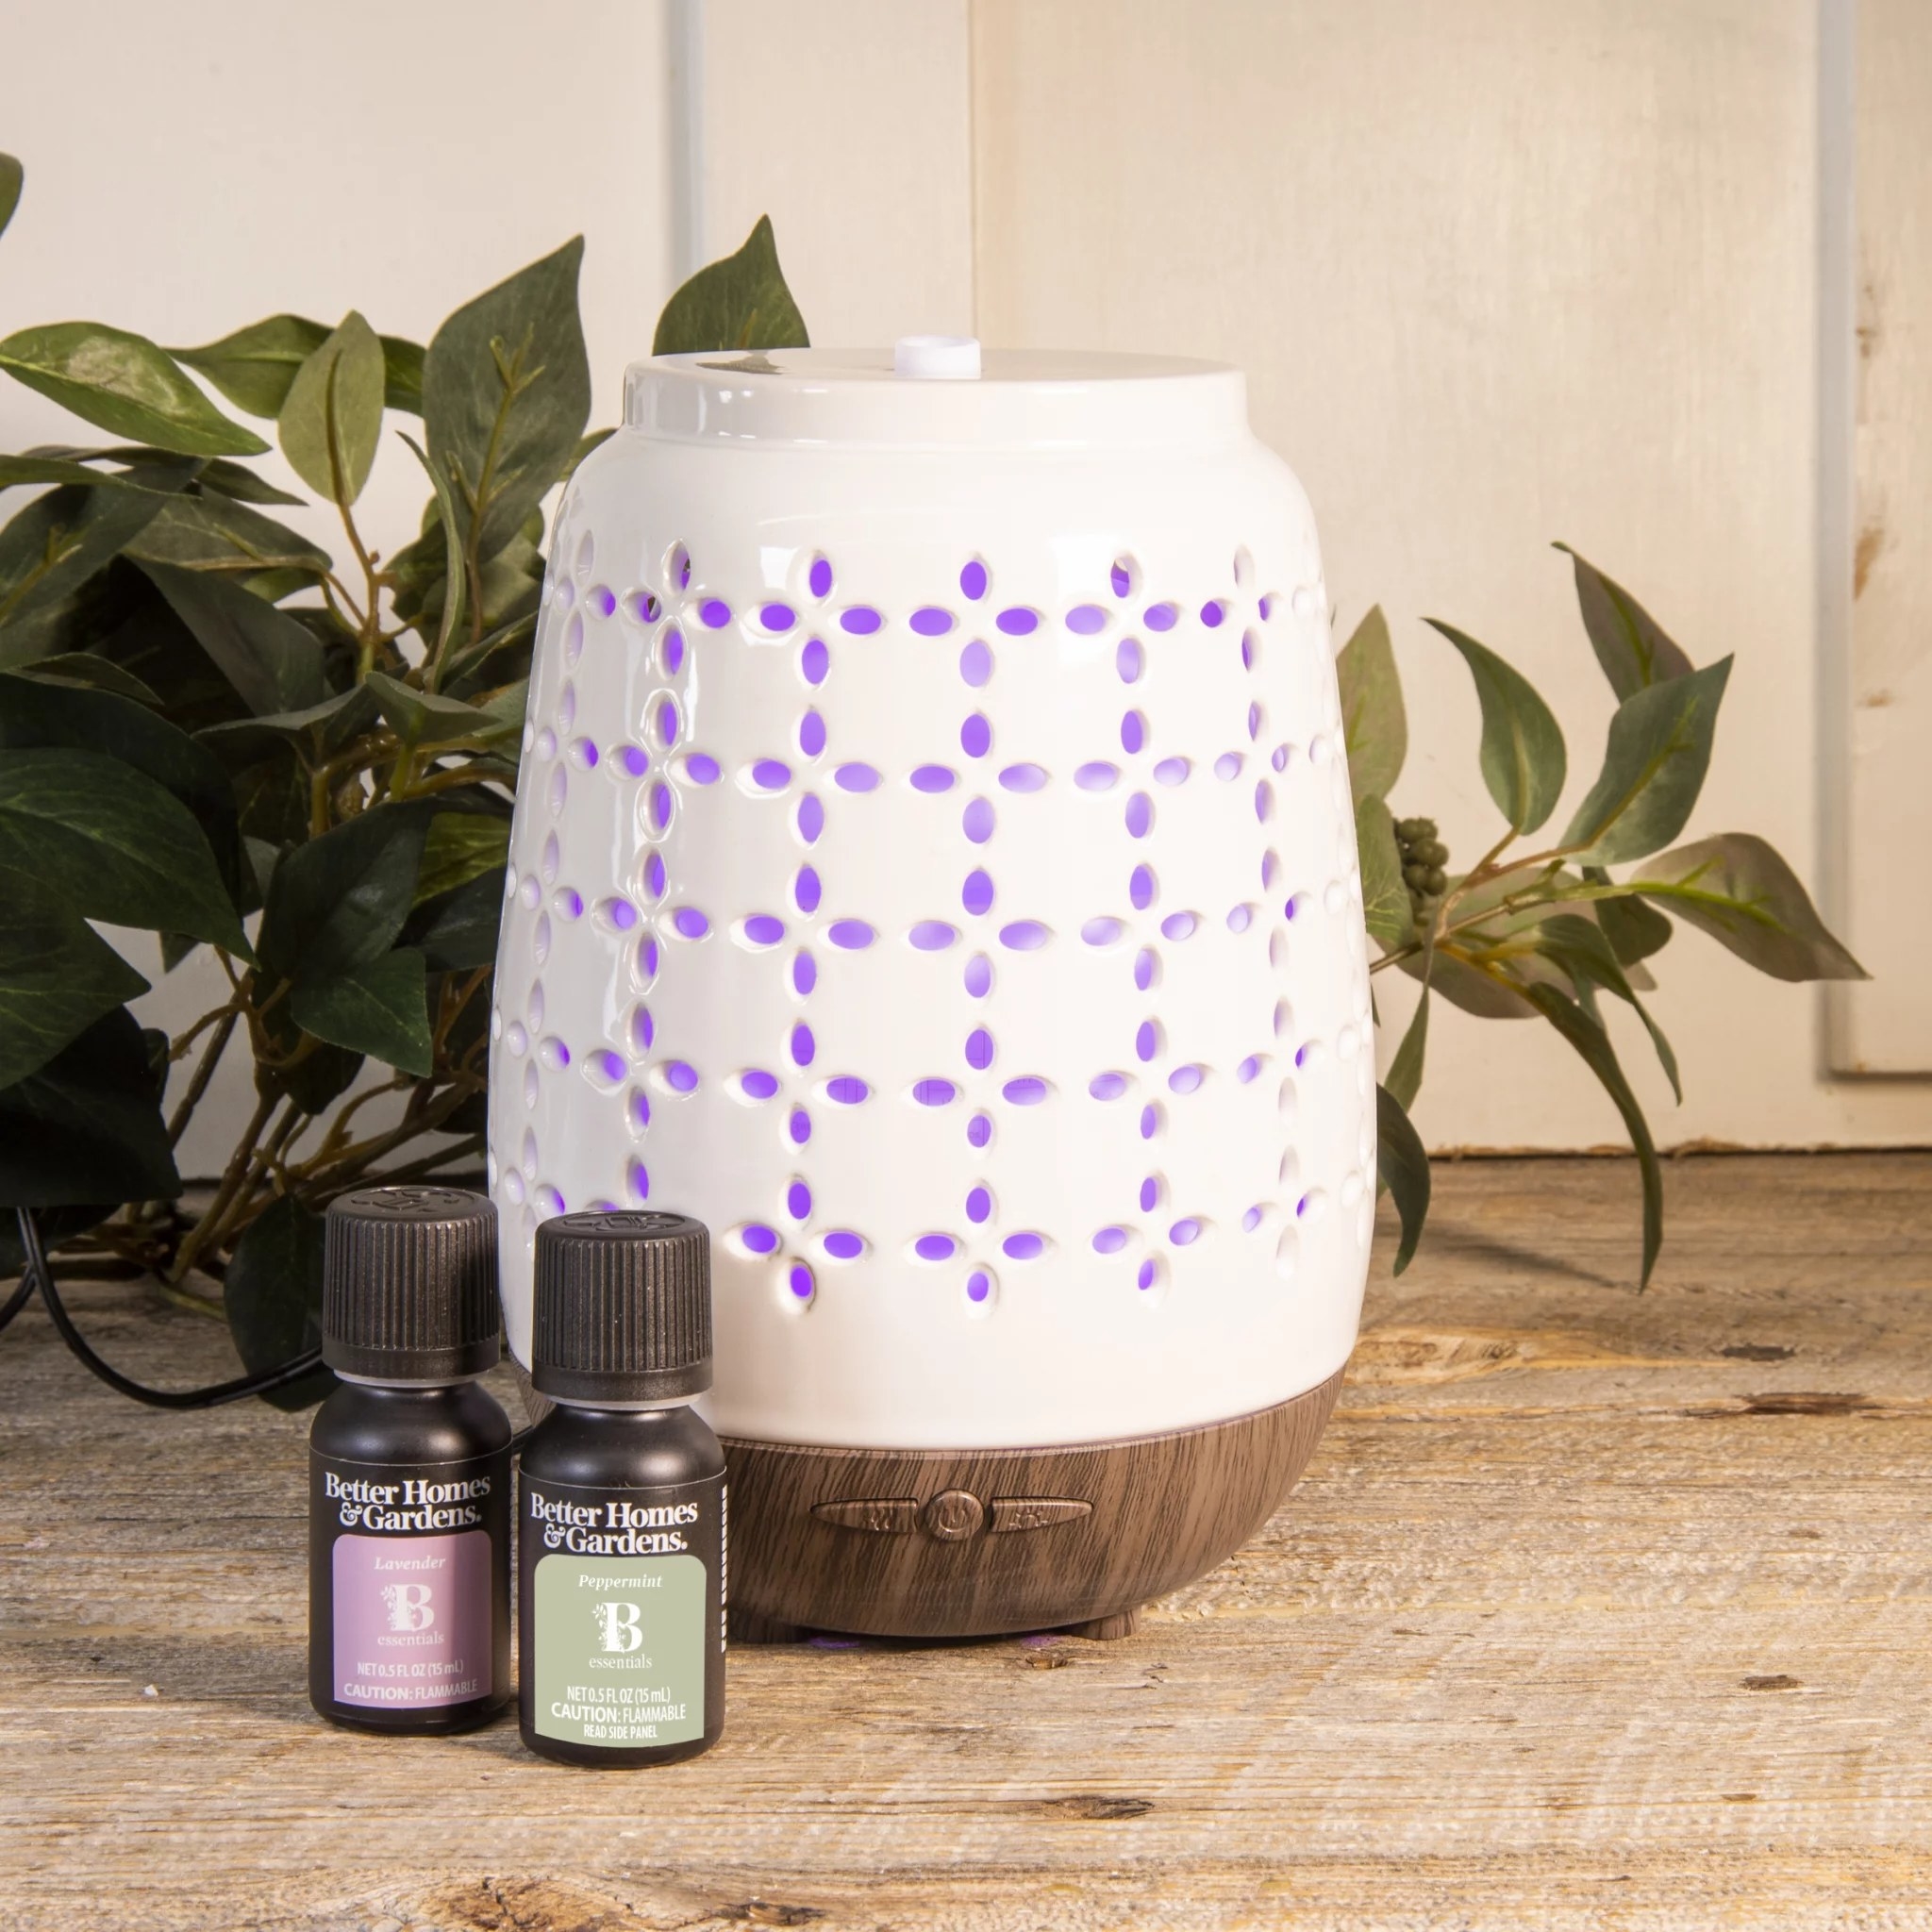 The oil diffuser with two bottles of essential oils